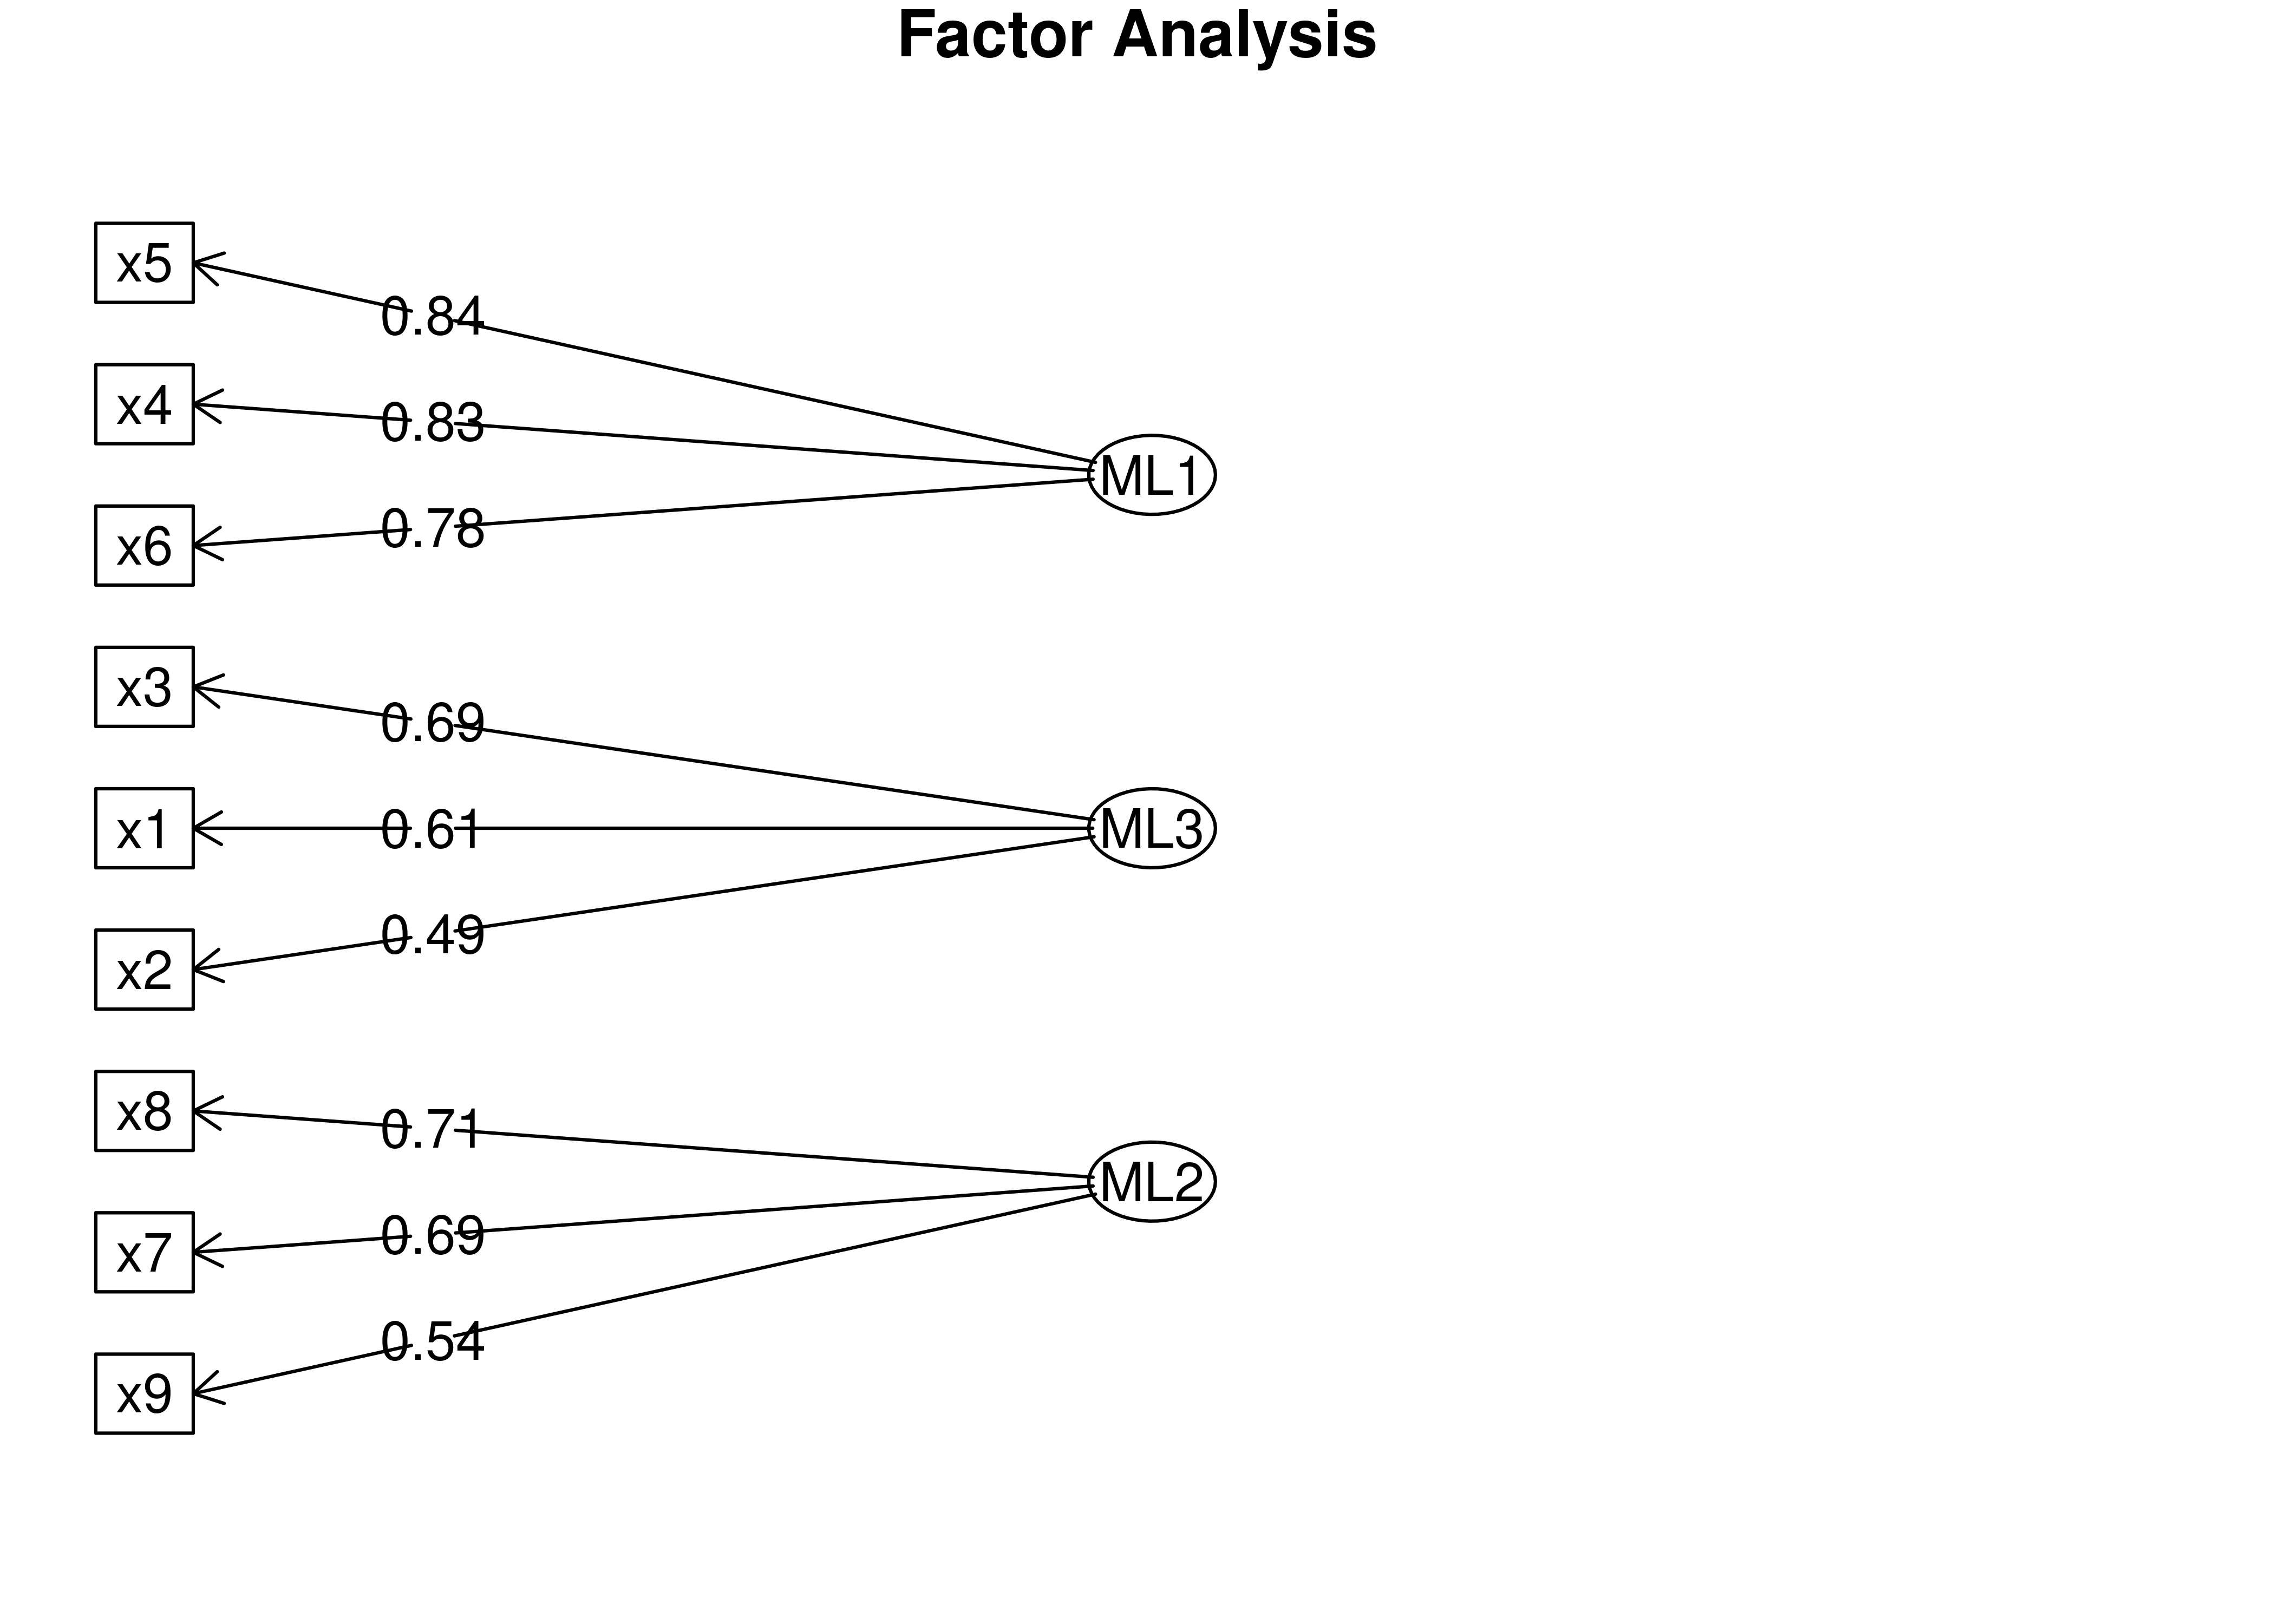 Factor Diagram With Orthogonal Rotation in Exploratory Factor Analysis.